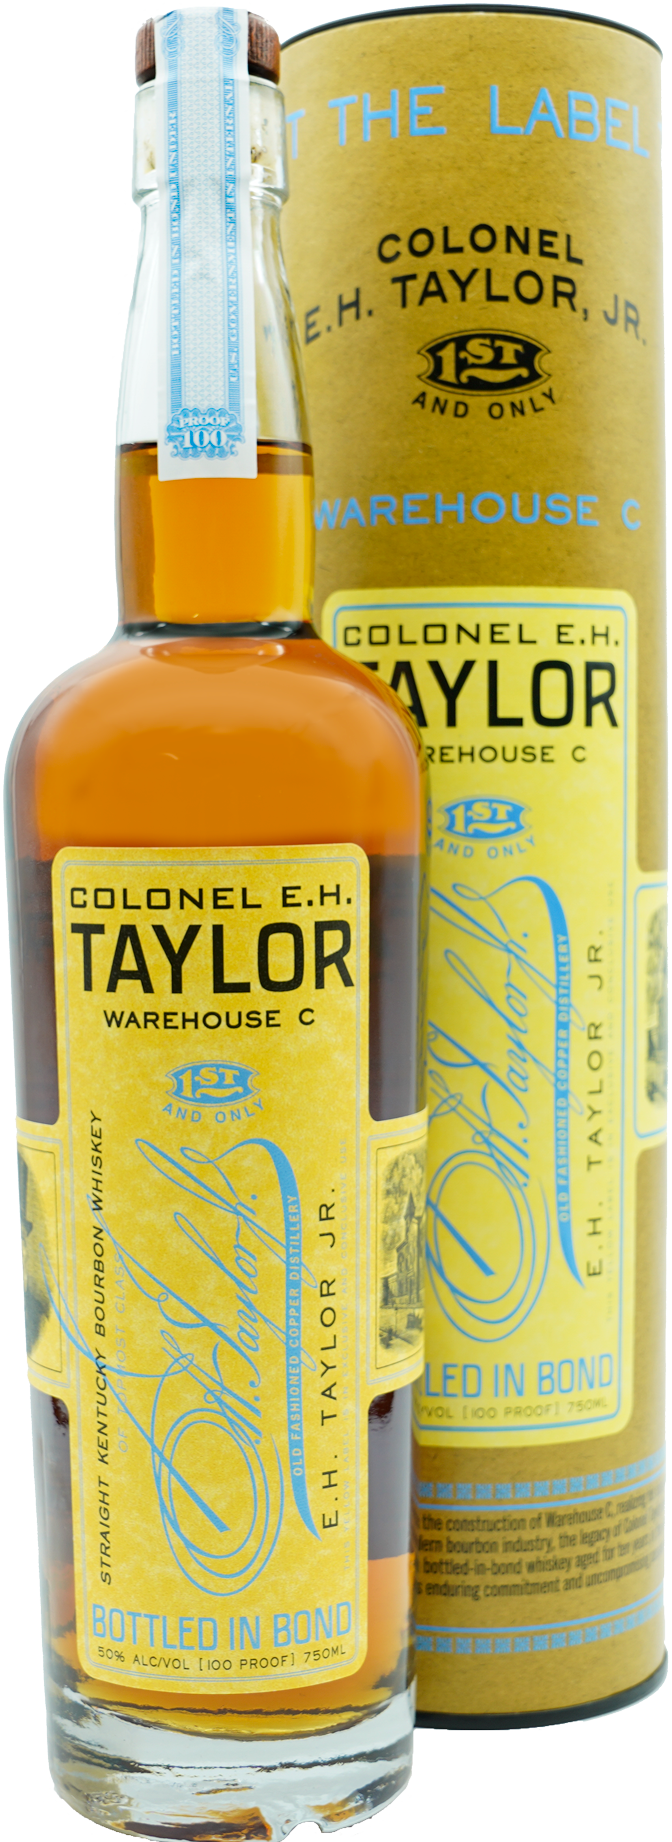 Colonel E.H. Taylor Warehouse C Straight Kentucky Bourbon Whiskey [Limit 1]